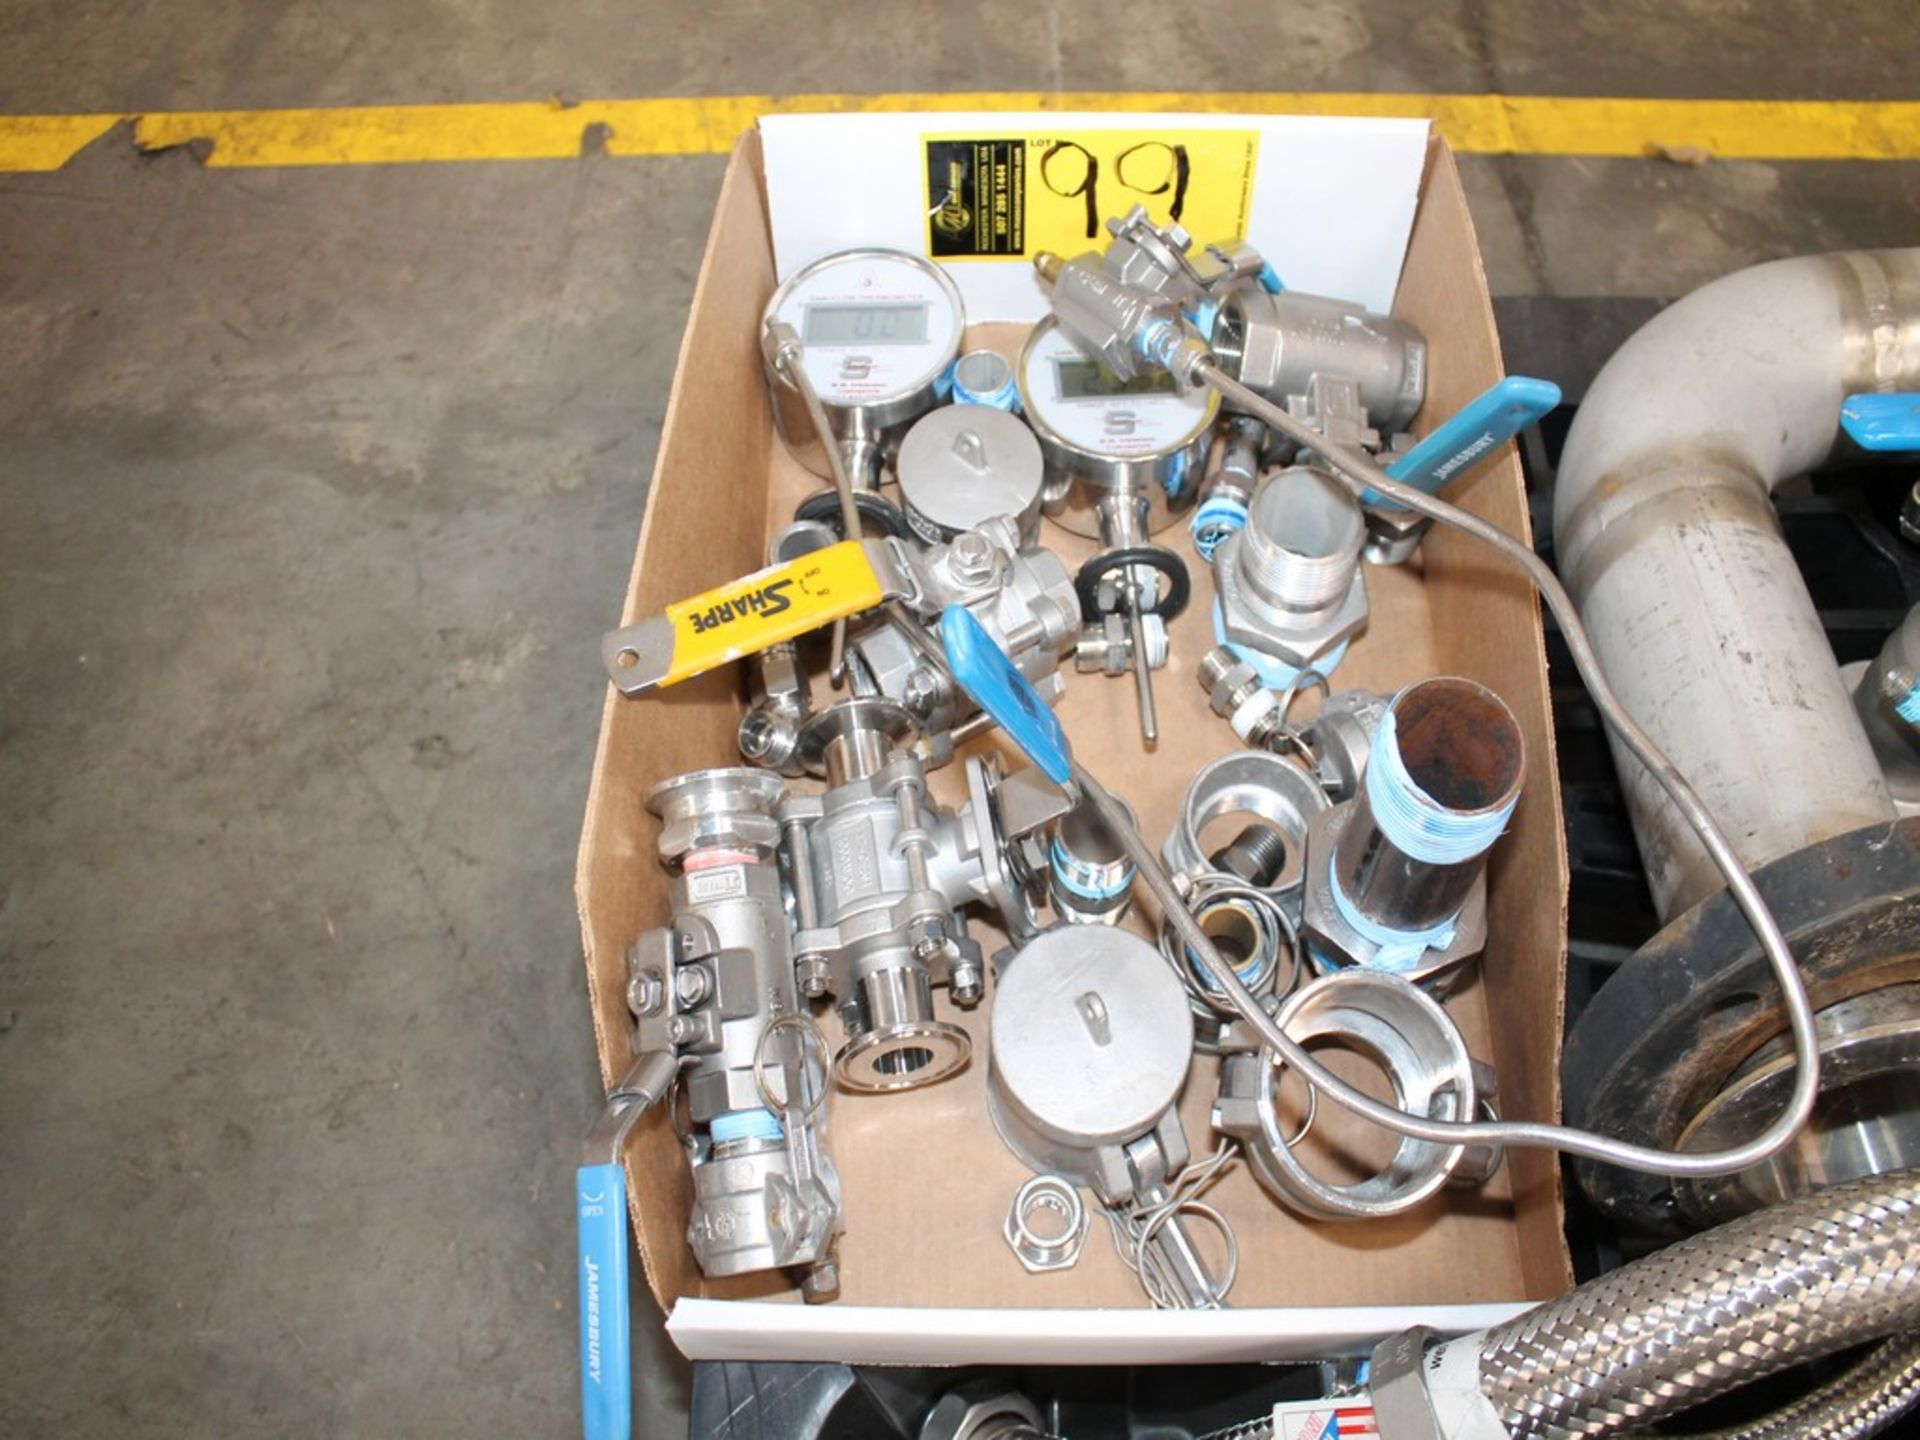 LOT CONTENTS OF PALLET WITH MISCELLANEOUS FLAME ARRESTORS, HOSES, VALVES, TRANSMITTERS, PIPE - Image 9 of 18